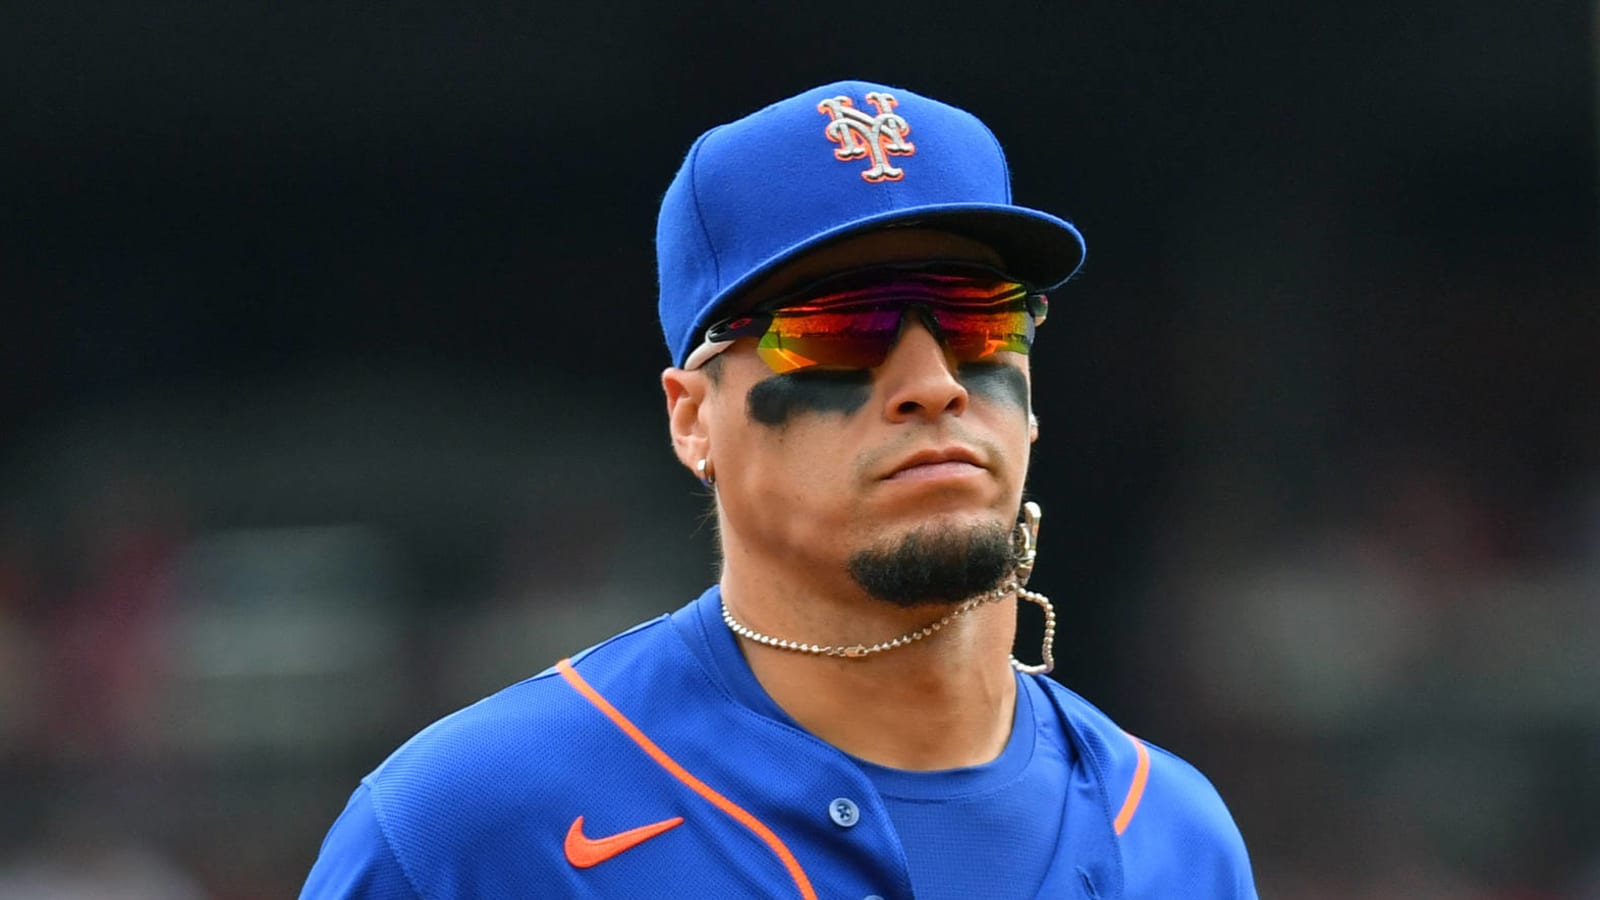 Mets fans boo Baez after 'thumbs-down' controversy, apologies